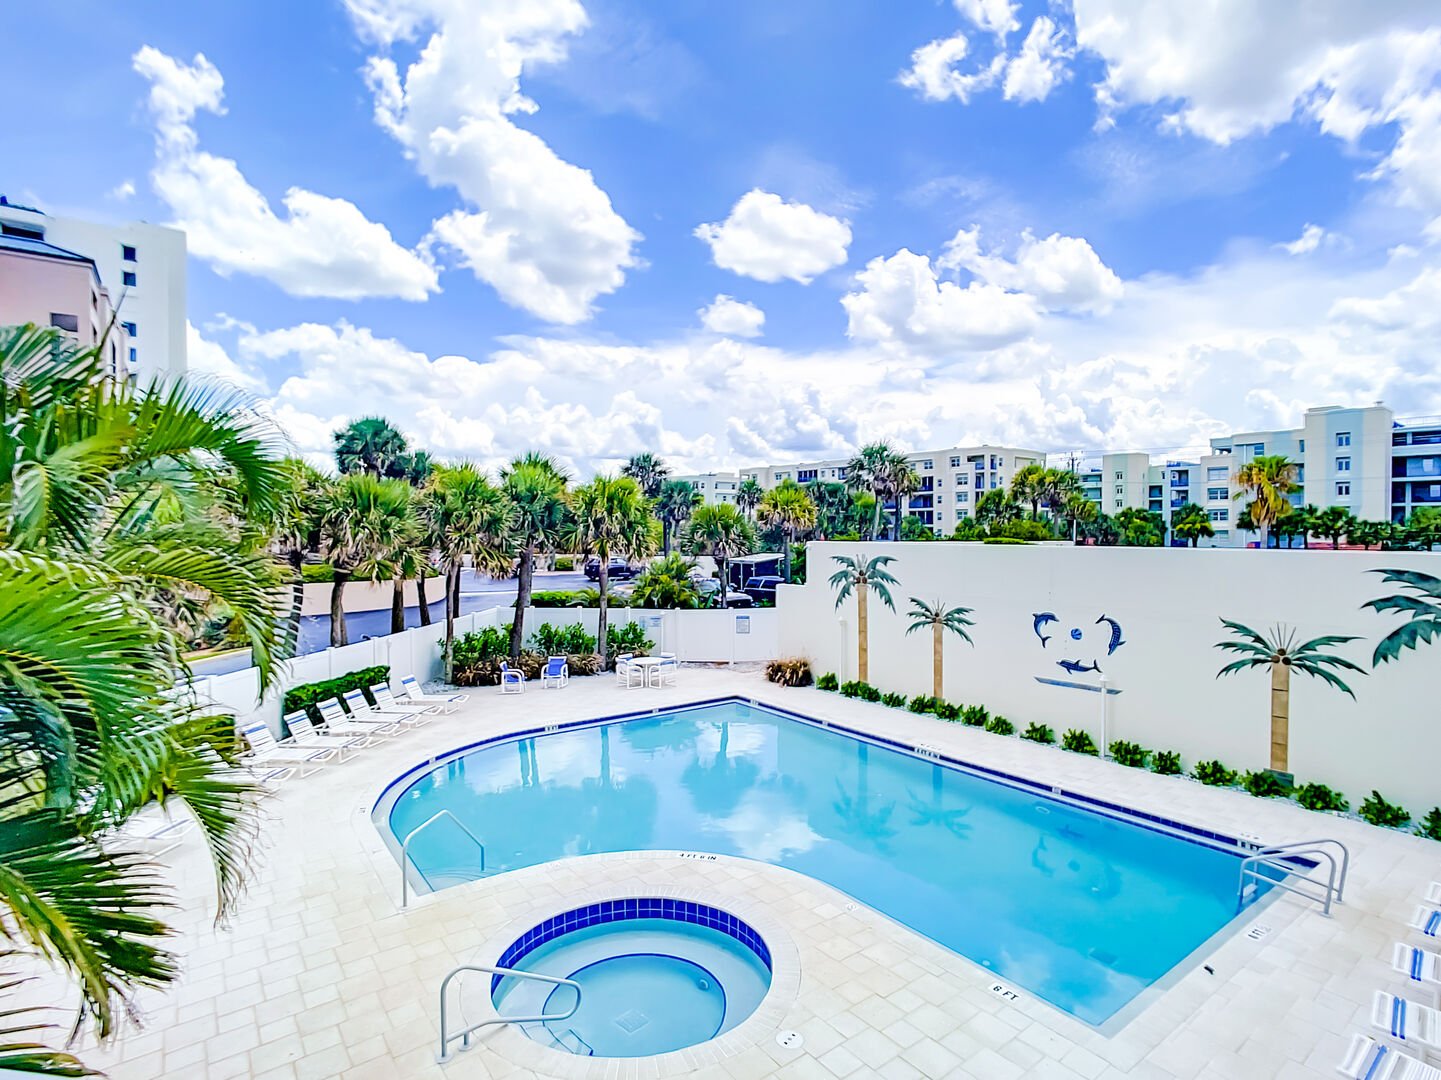 Kick back and relax by the pool or jump into the Jacuzzi.